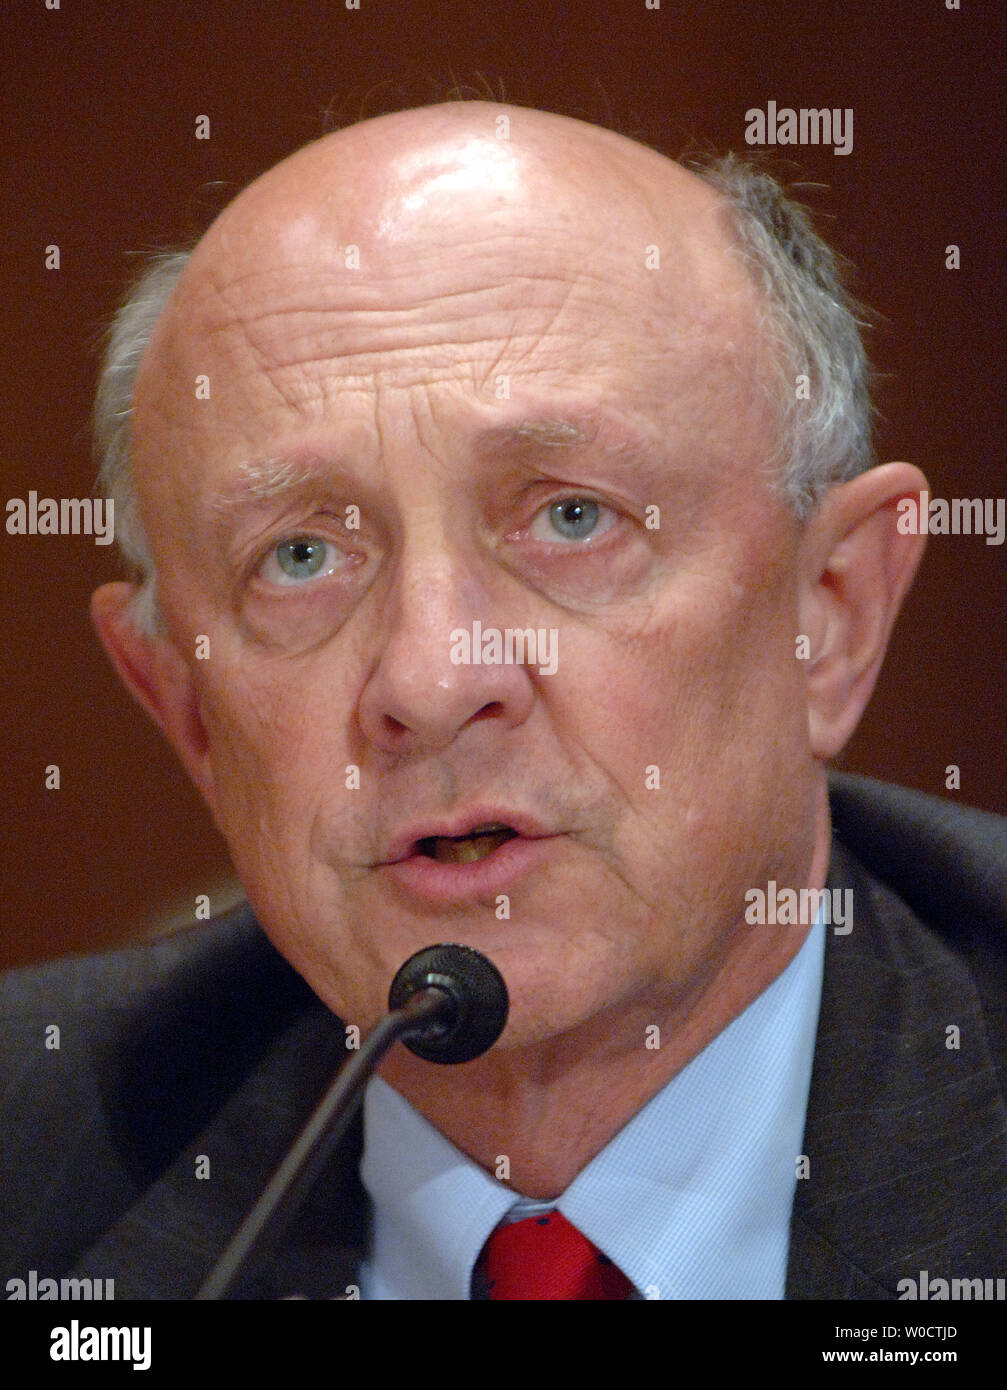 Former CIA Director James Woolsey testifies before the Senate Homeland Security and Governmental Affairs Committee about the risks Iran's nulcear program poses to world peace during a hearing on Capitol Hill in Washington on November 15, 2005. He and other witnesses agreed that Iran's attempts to gain nuclear weapons is a major threat, but  offered different views on how to curb the problem, including diplomatic, military and other solutions.   (UPI Photo/Roger L. Wollenberg) Stock Photo